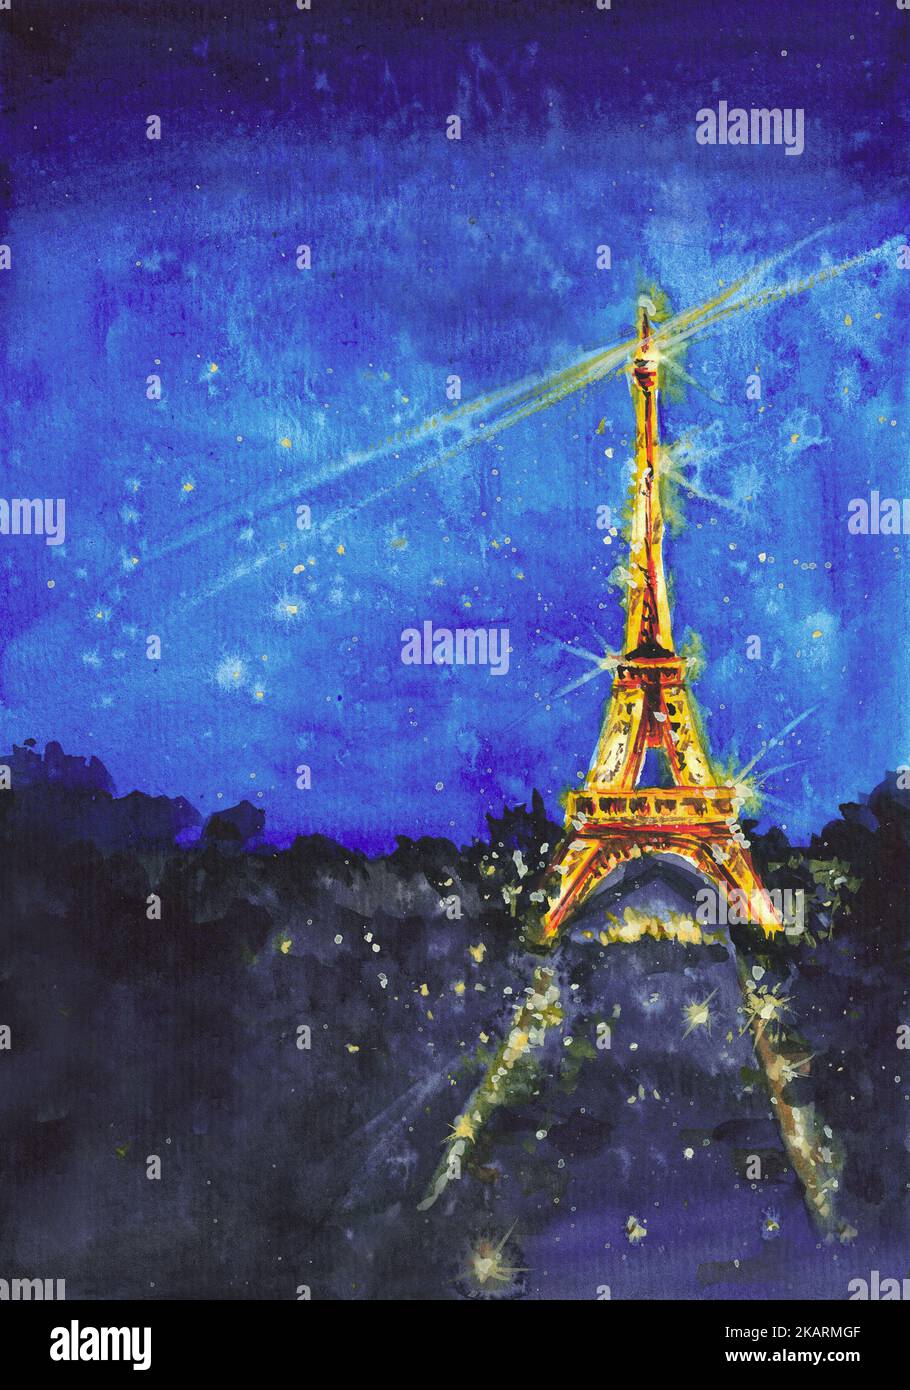 Paris street at night with the Eiffel Tower light show on starry night background. Hand drawn water colour illustration with night scenery. Stock Photo